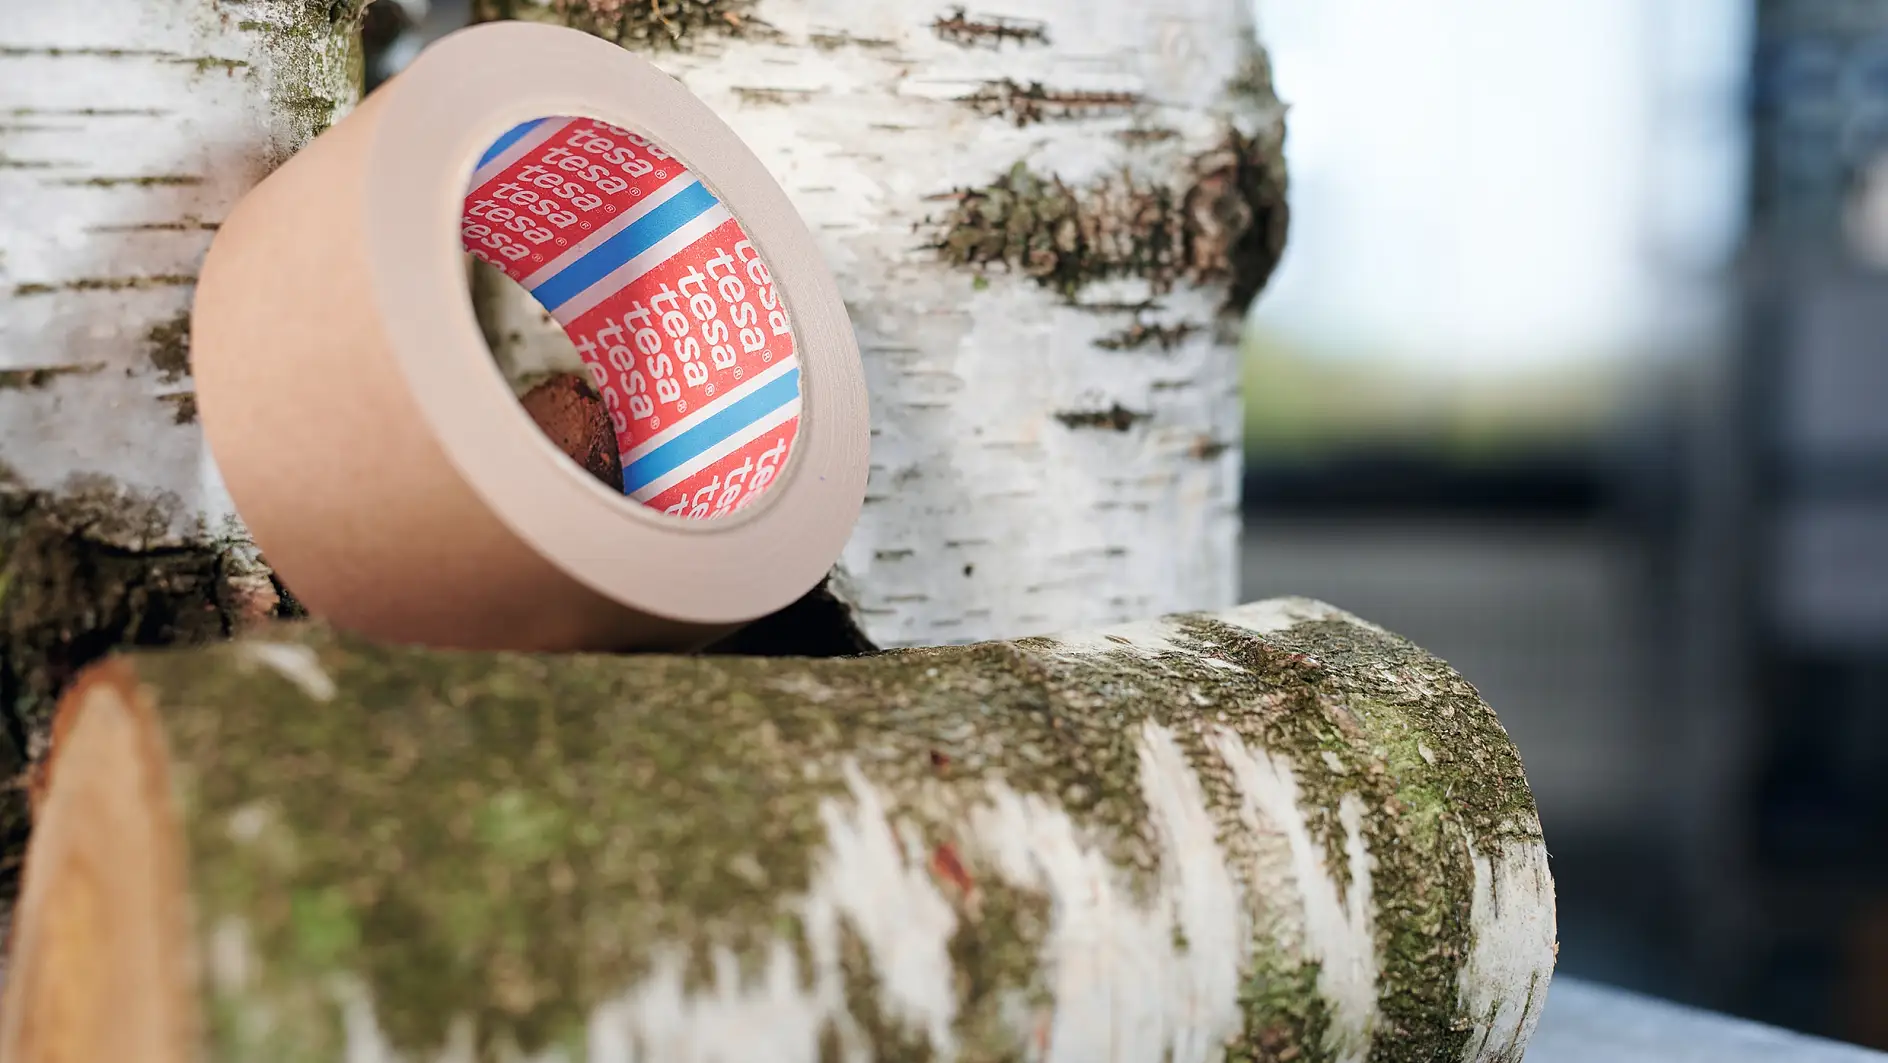 Sustainable packaging tapes can simply be recycled together with other cardboard packaging. A good example is the new tesa paper tape based on a natural rubber adhesive with FSC certification.